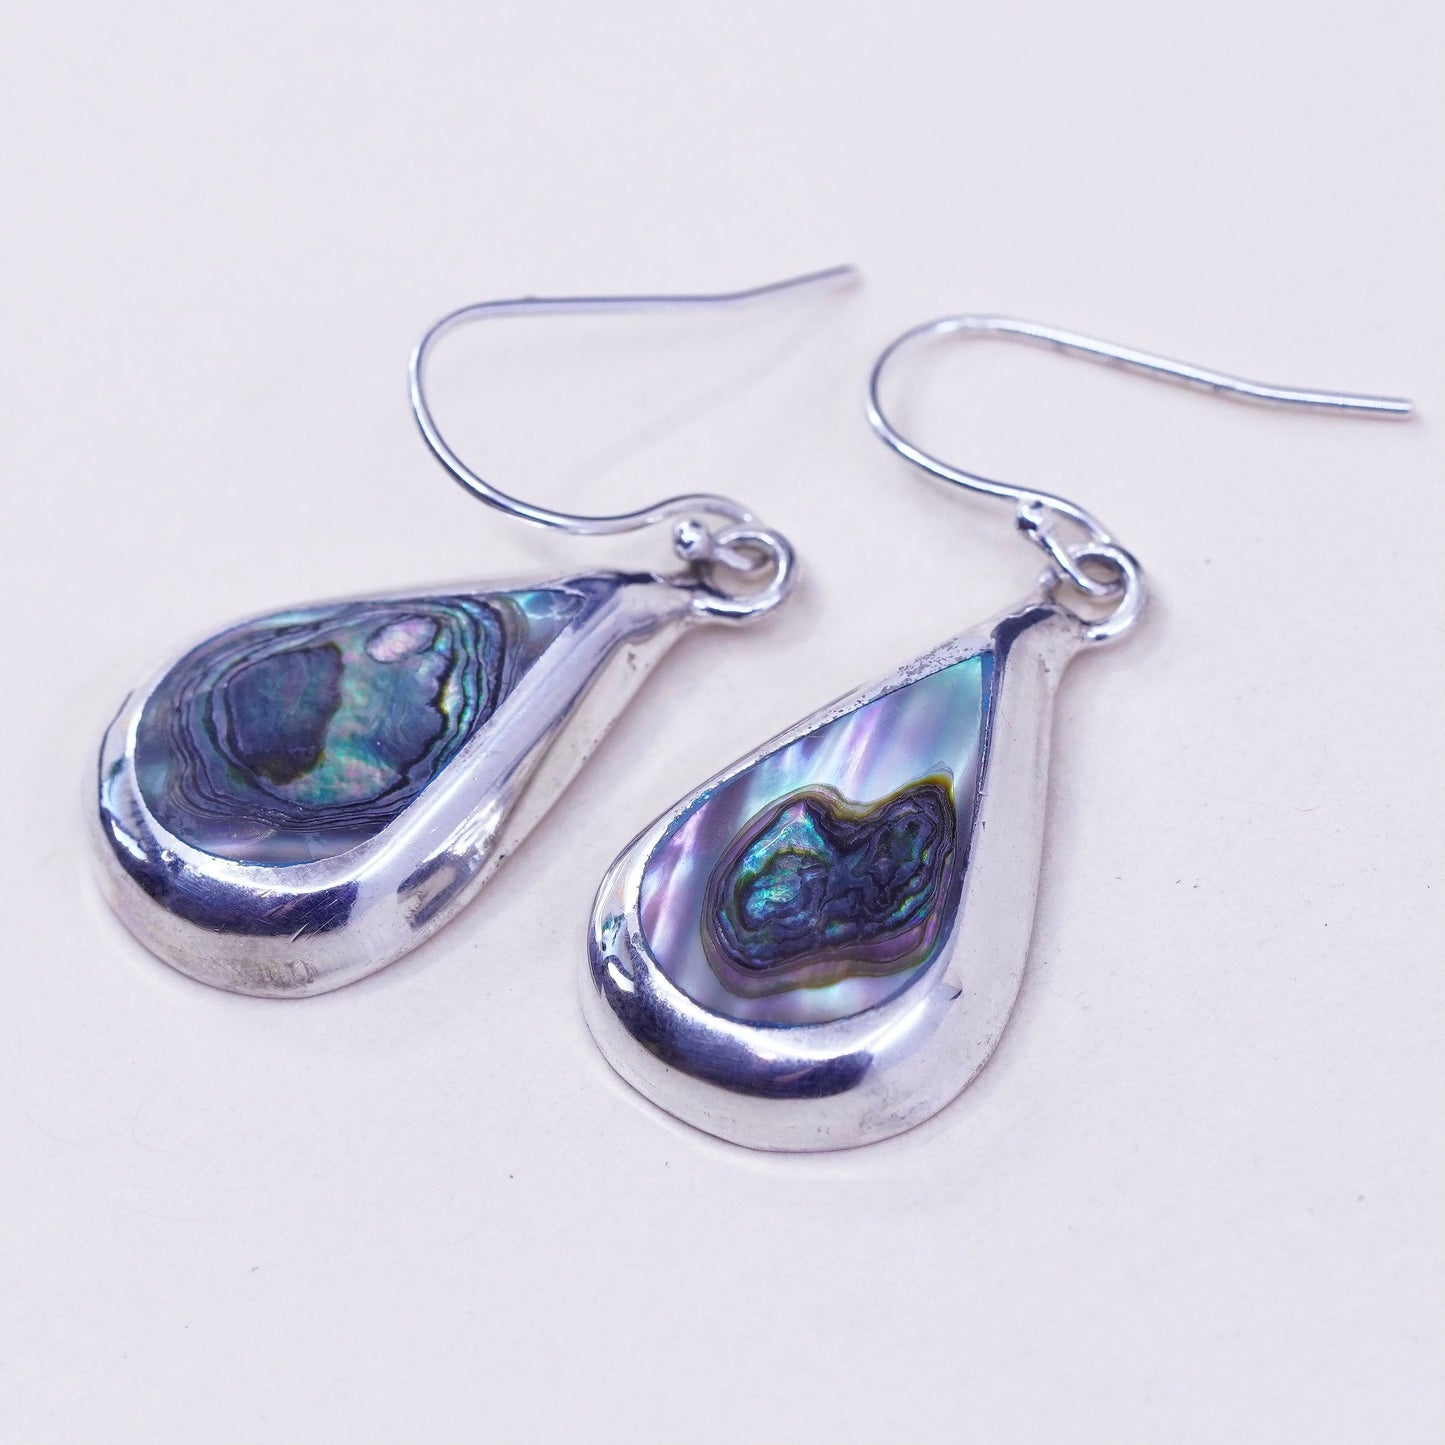 Vintage Mexico sterling 925 silver handmade teardrop earrings with abalone